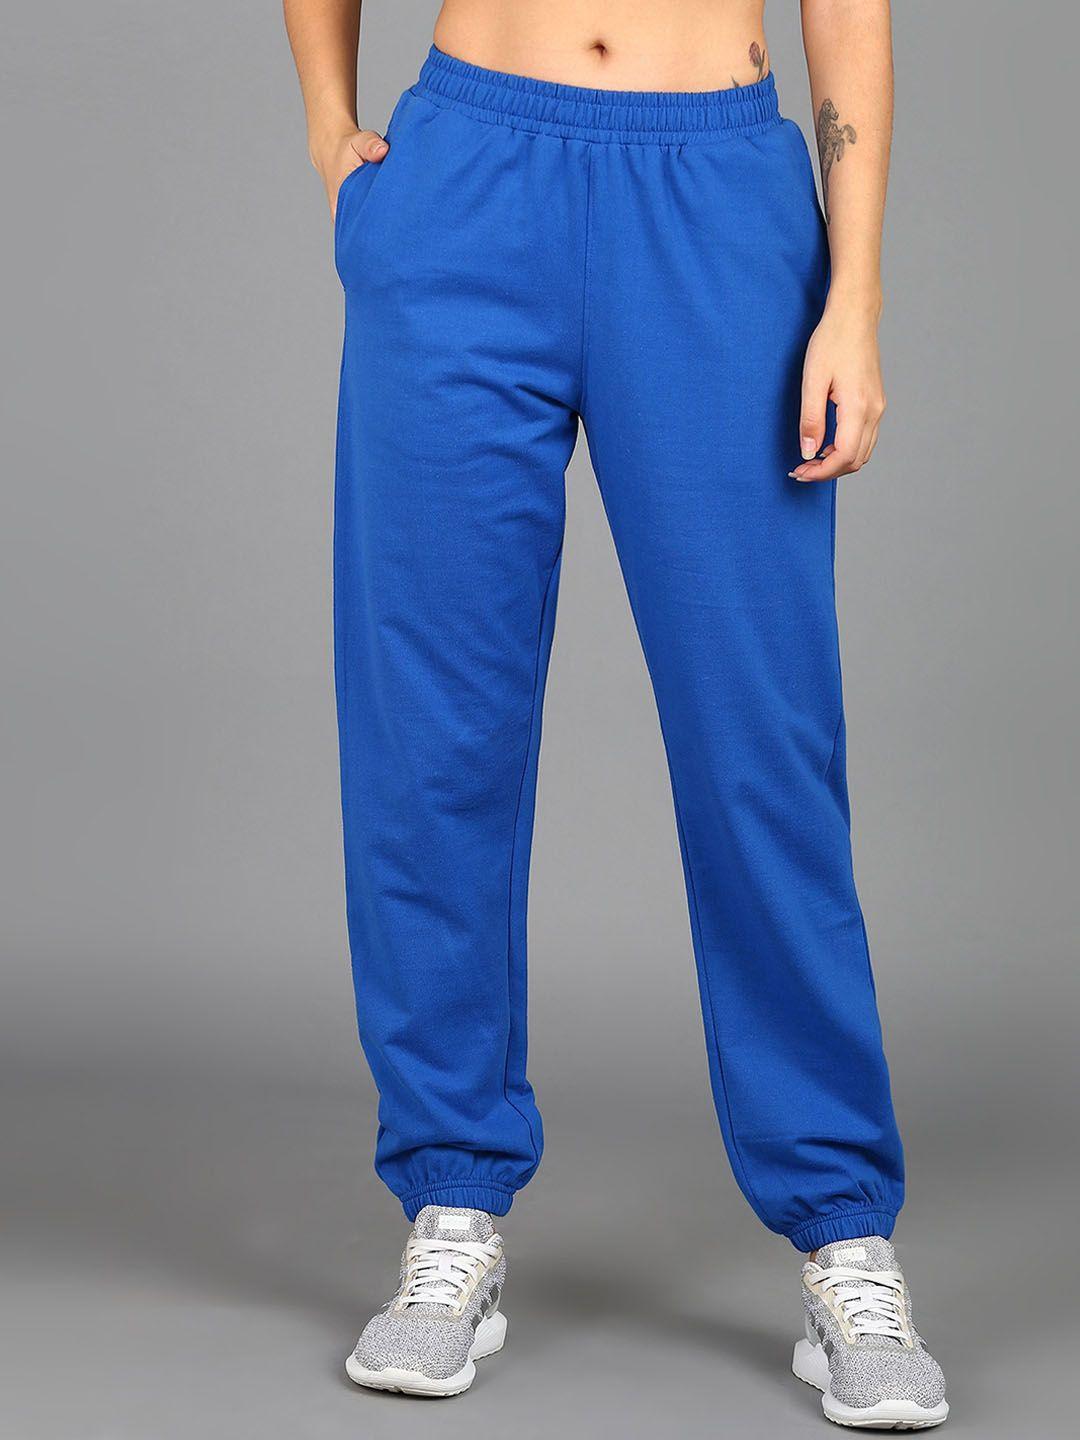 The Roadster Lifestyle Co. Women Blue Mid Rise Joggers